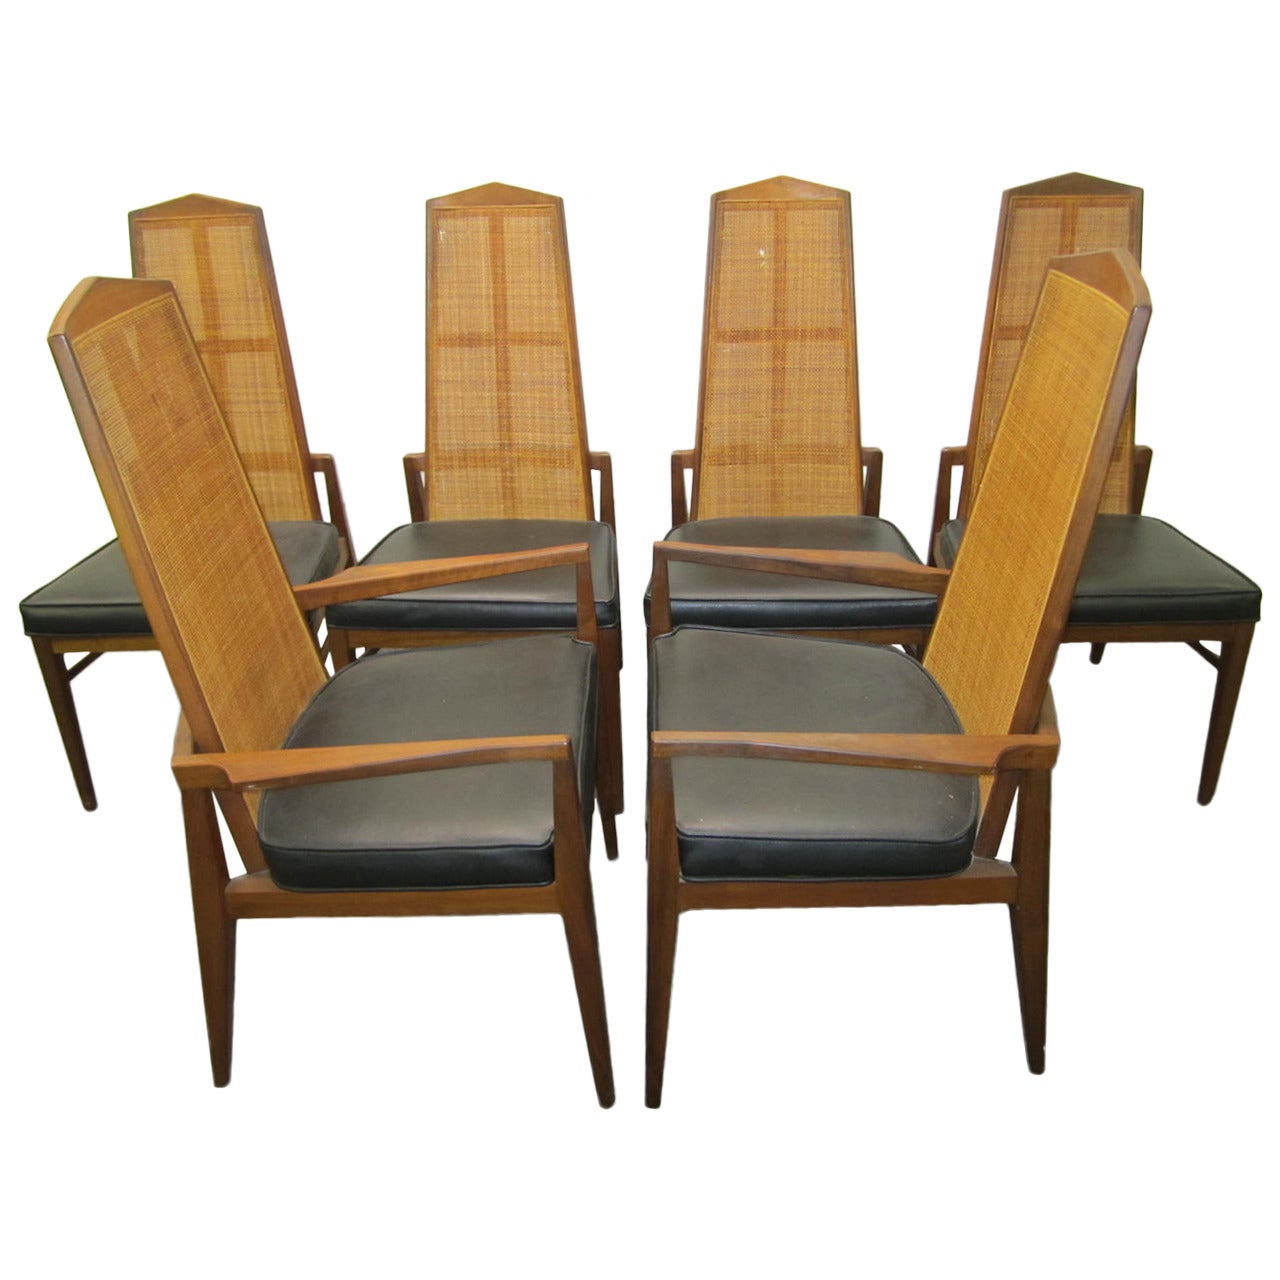 Six Walnut Foster and McDavid Cane Back Dining Chairs, Mid-Century Modern For Sale